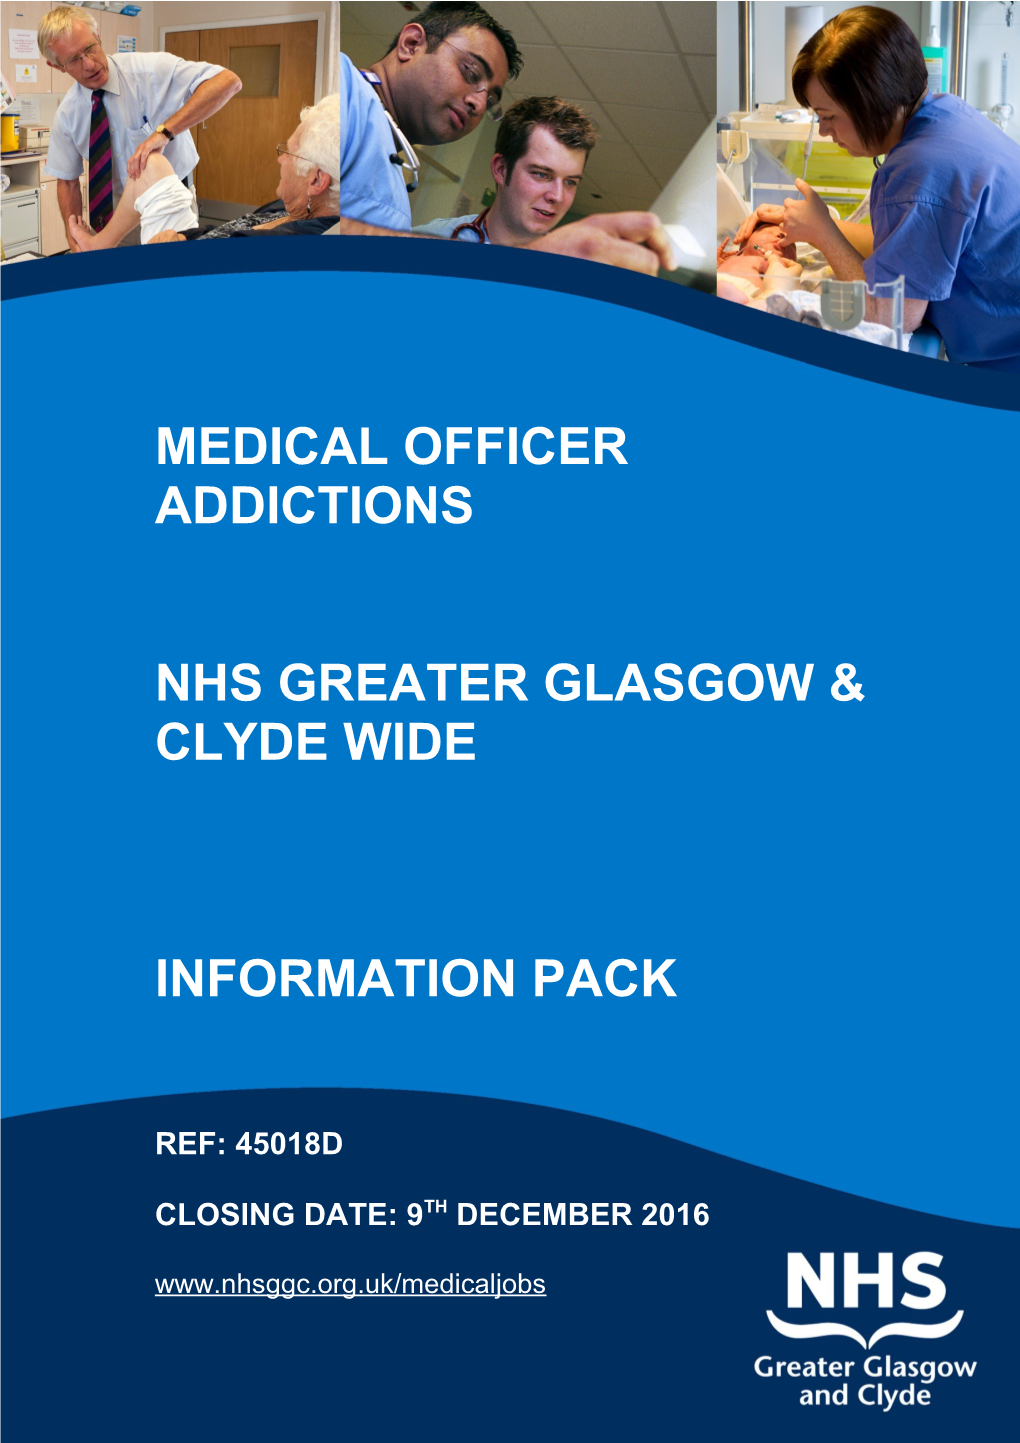 Nhs Greater Glasgow & Clyde Wide